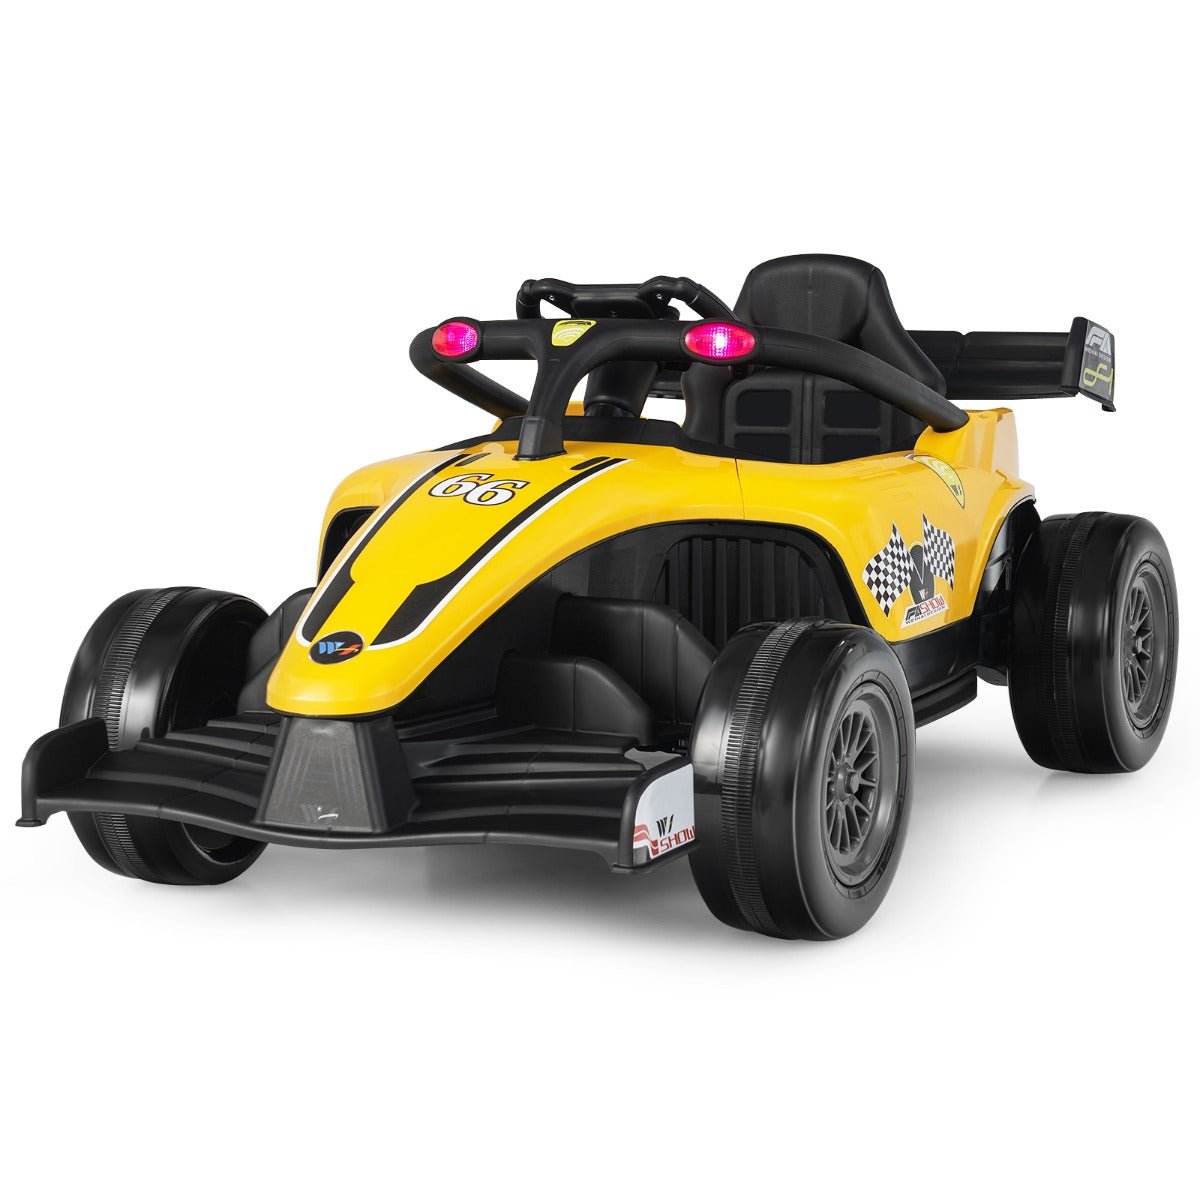 Ride and Race in Style with Our Kids' Yellow Racing Car